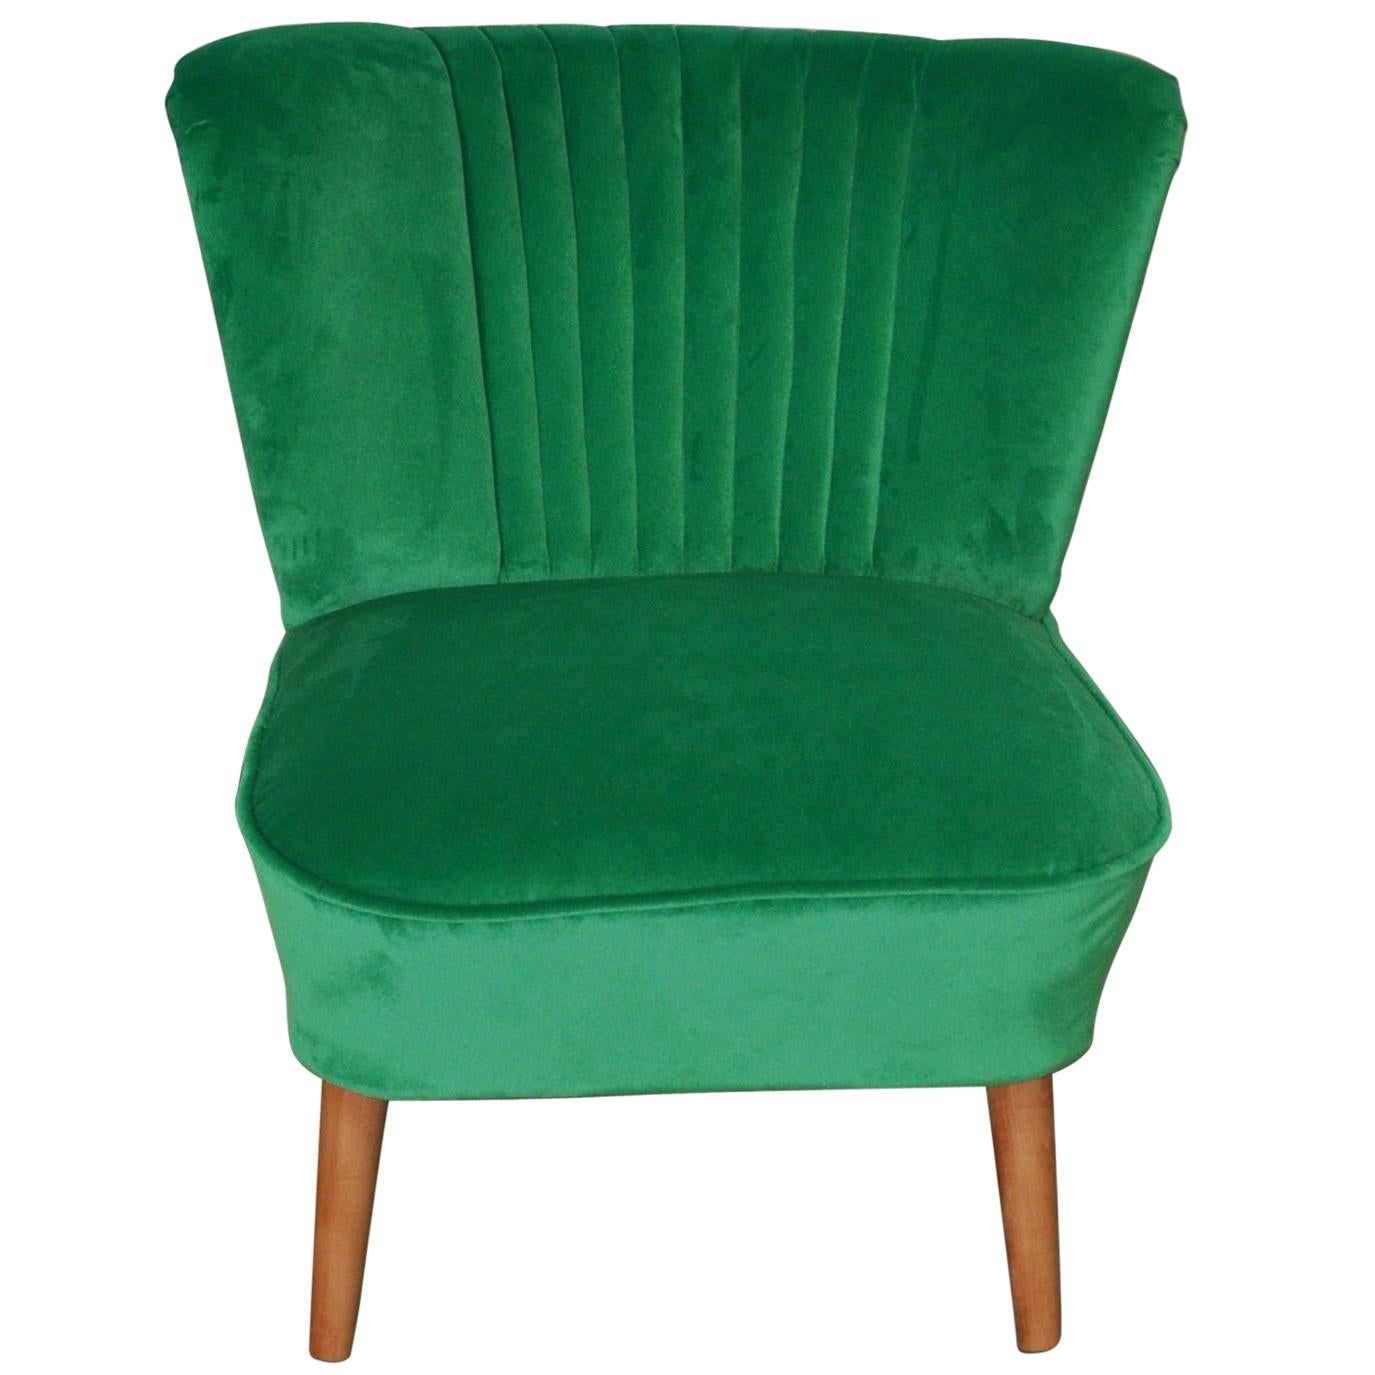 Cocktail Chair with a Green Fabric im Angebot